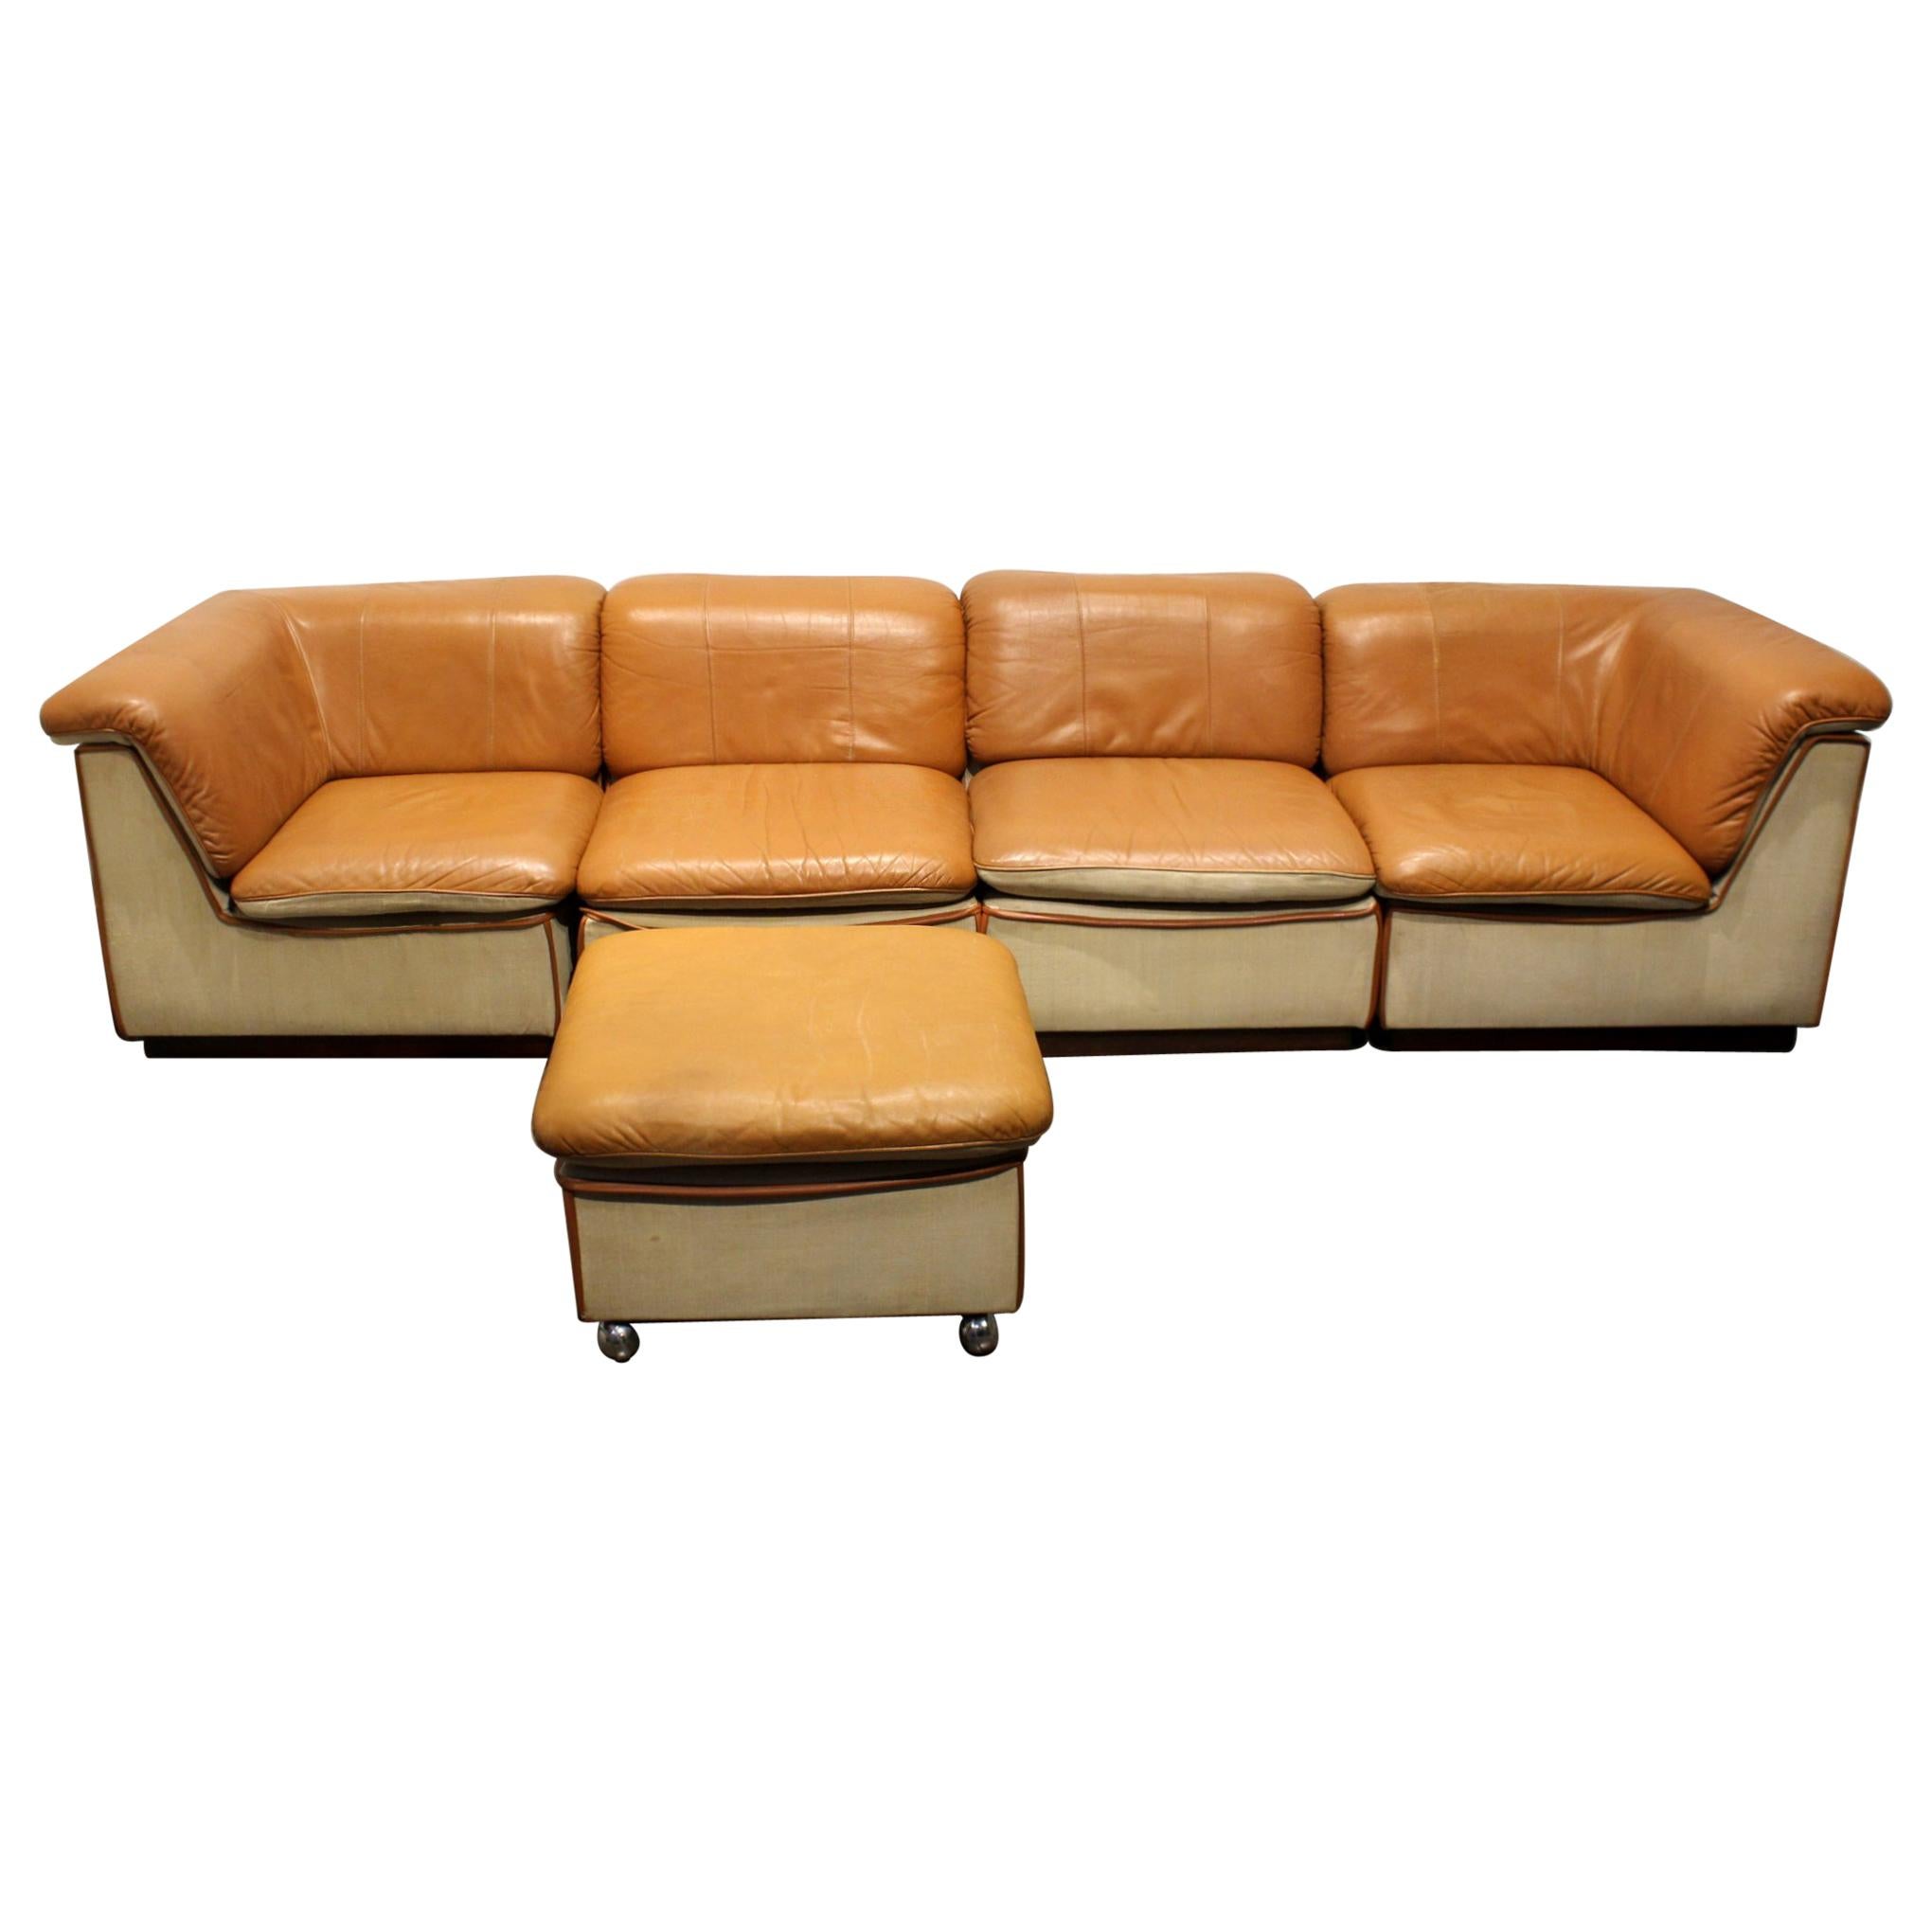 1960s Scandinavian Leather and Linen Modular Sectional Sofa For Sale